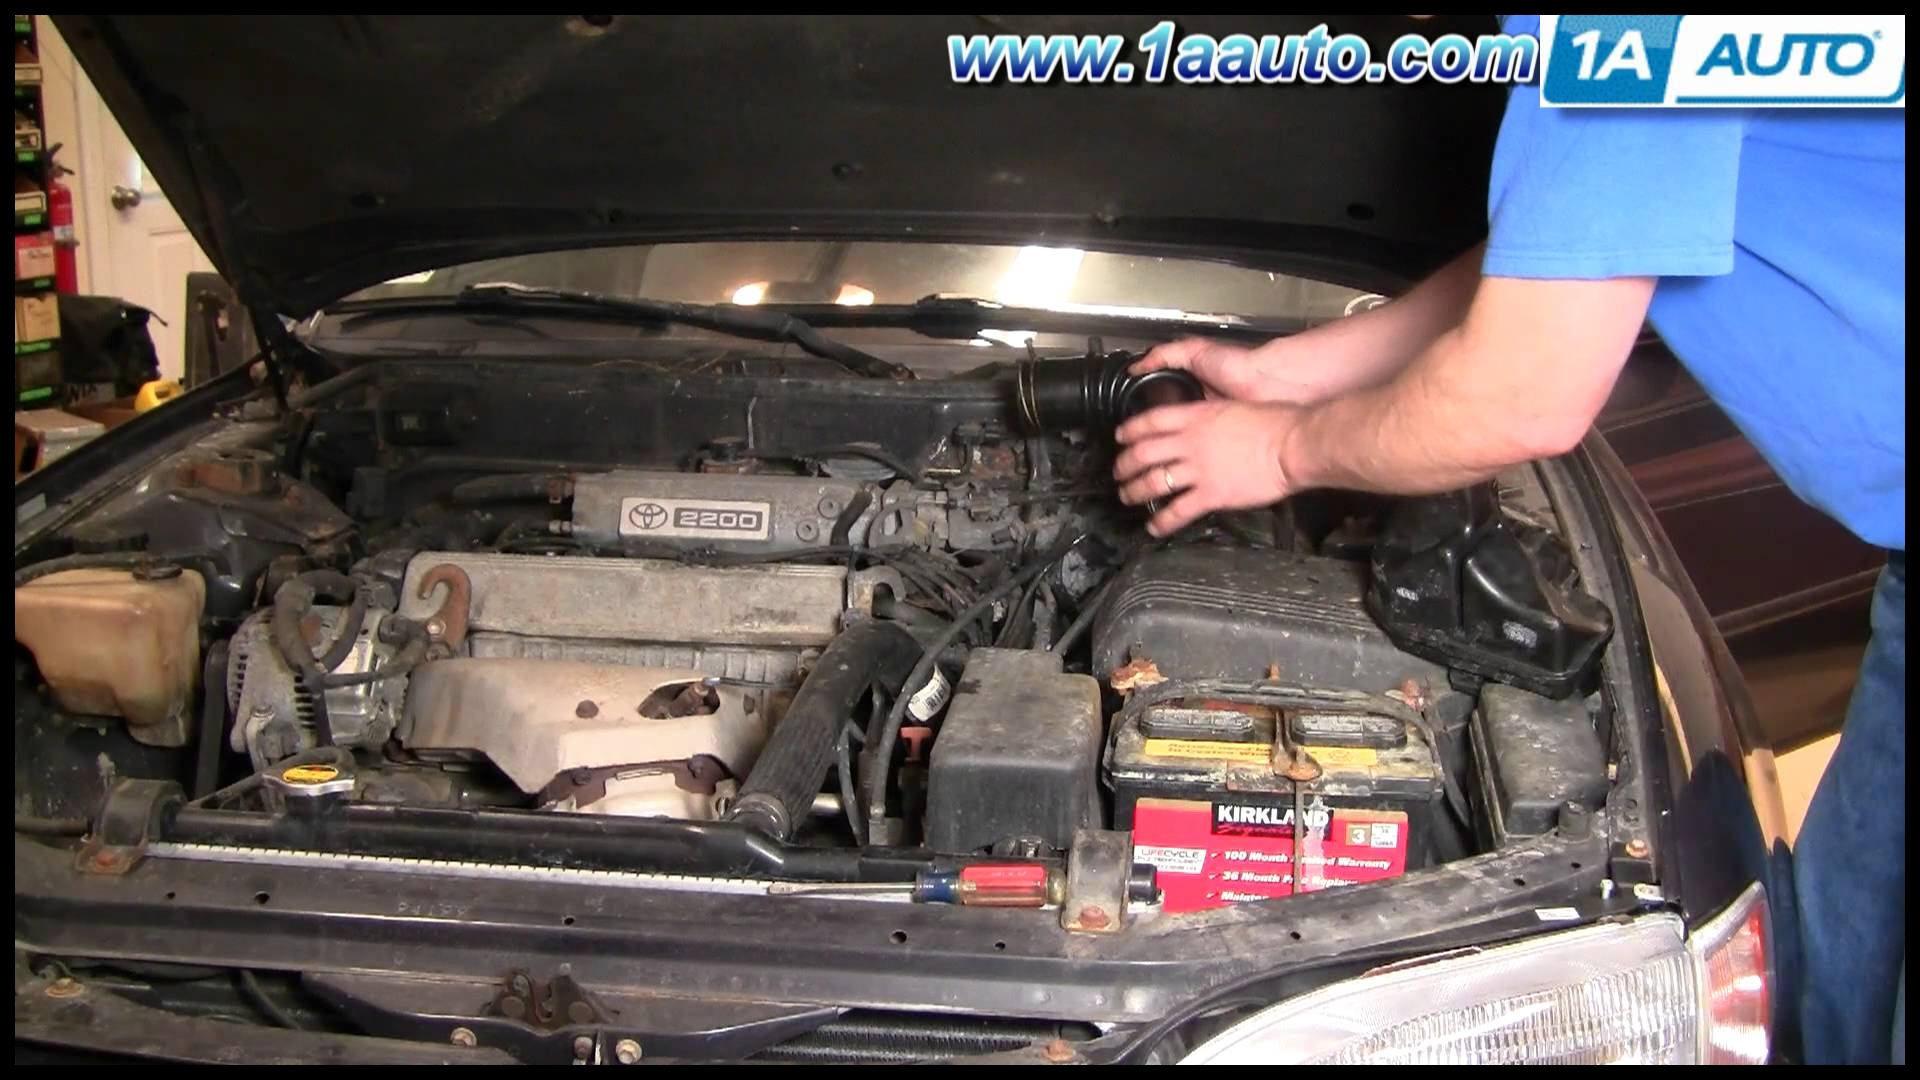 How To Install Replace Engine Air Intake Hose Toyota Camry 2 2L 95 96 1AAuto